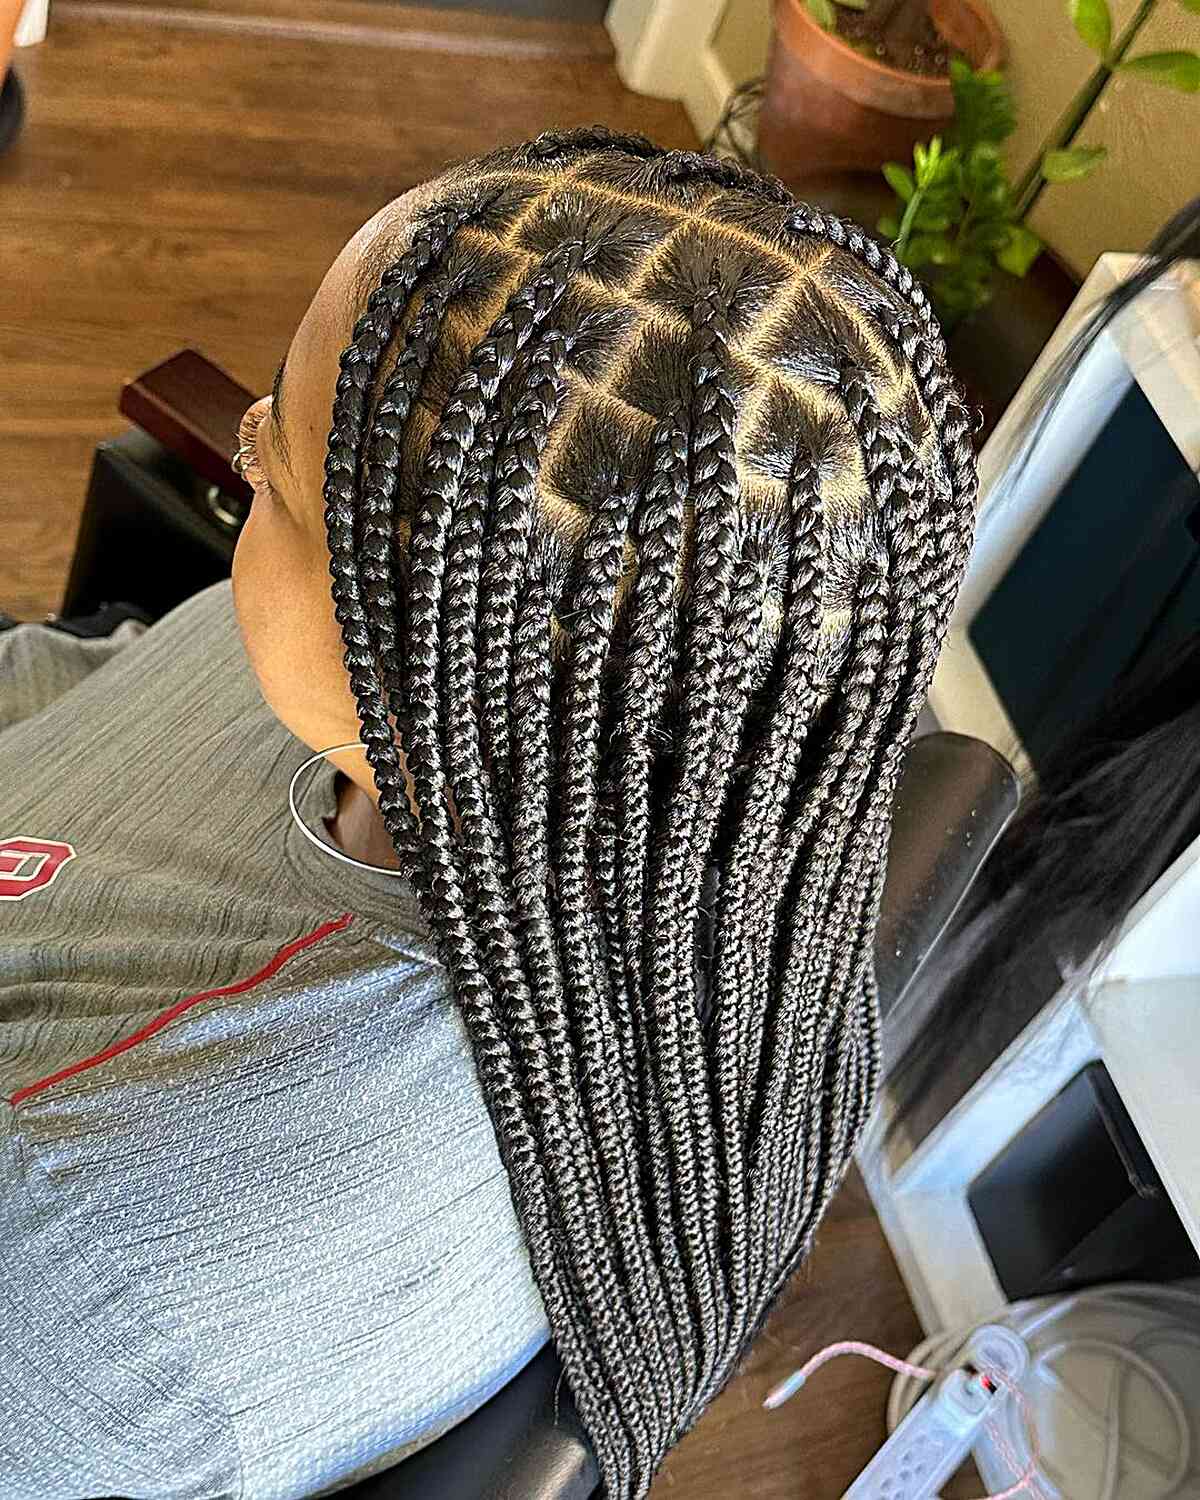 Classic Middle-Parted Knotless Box Braids on Long-Length Dark Hair